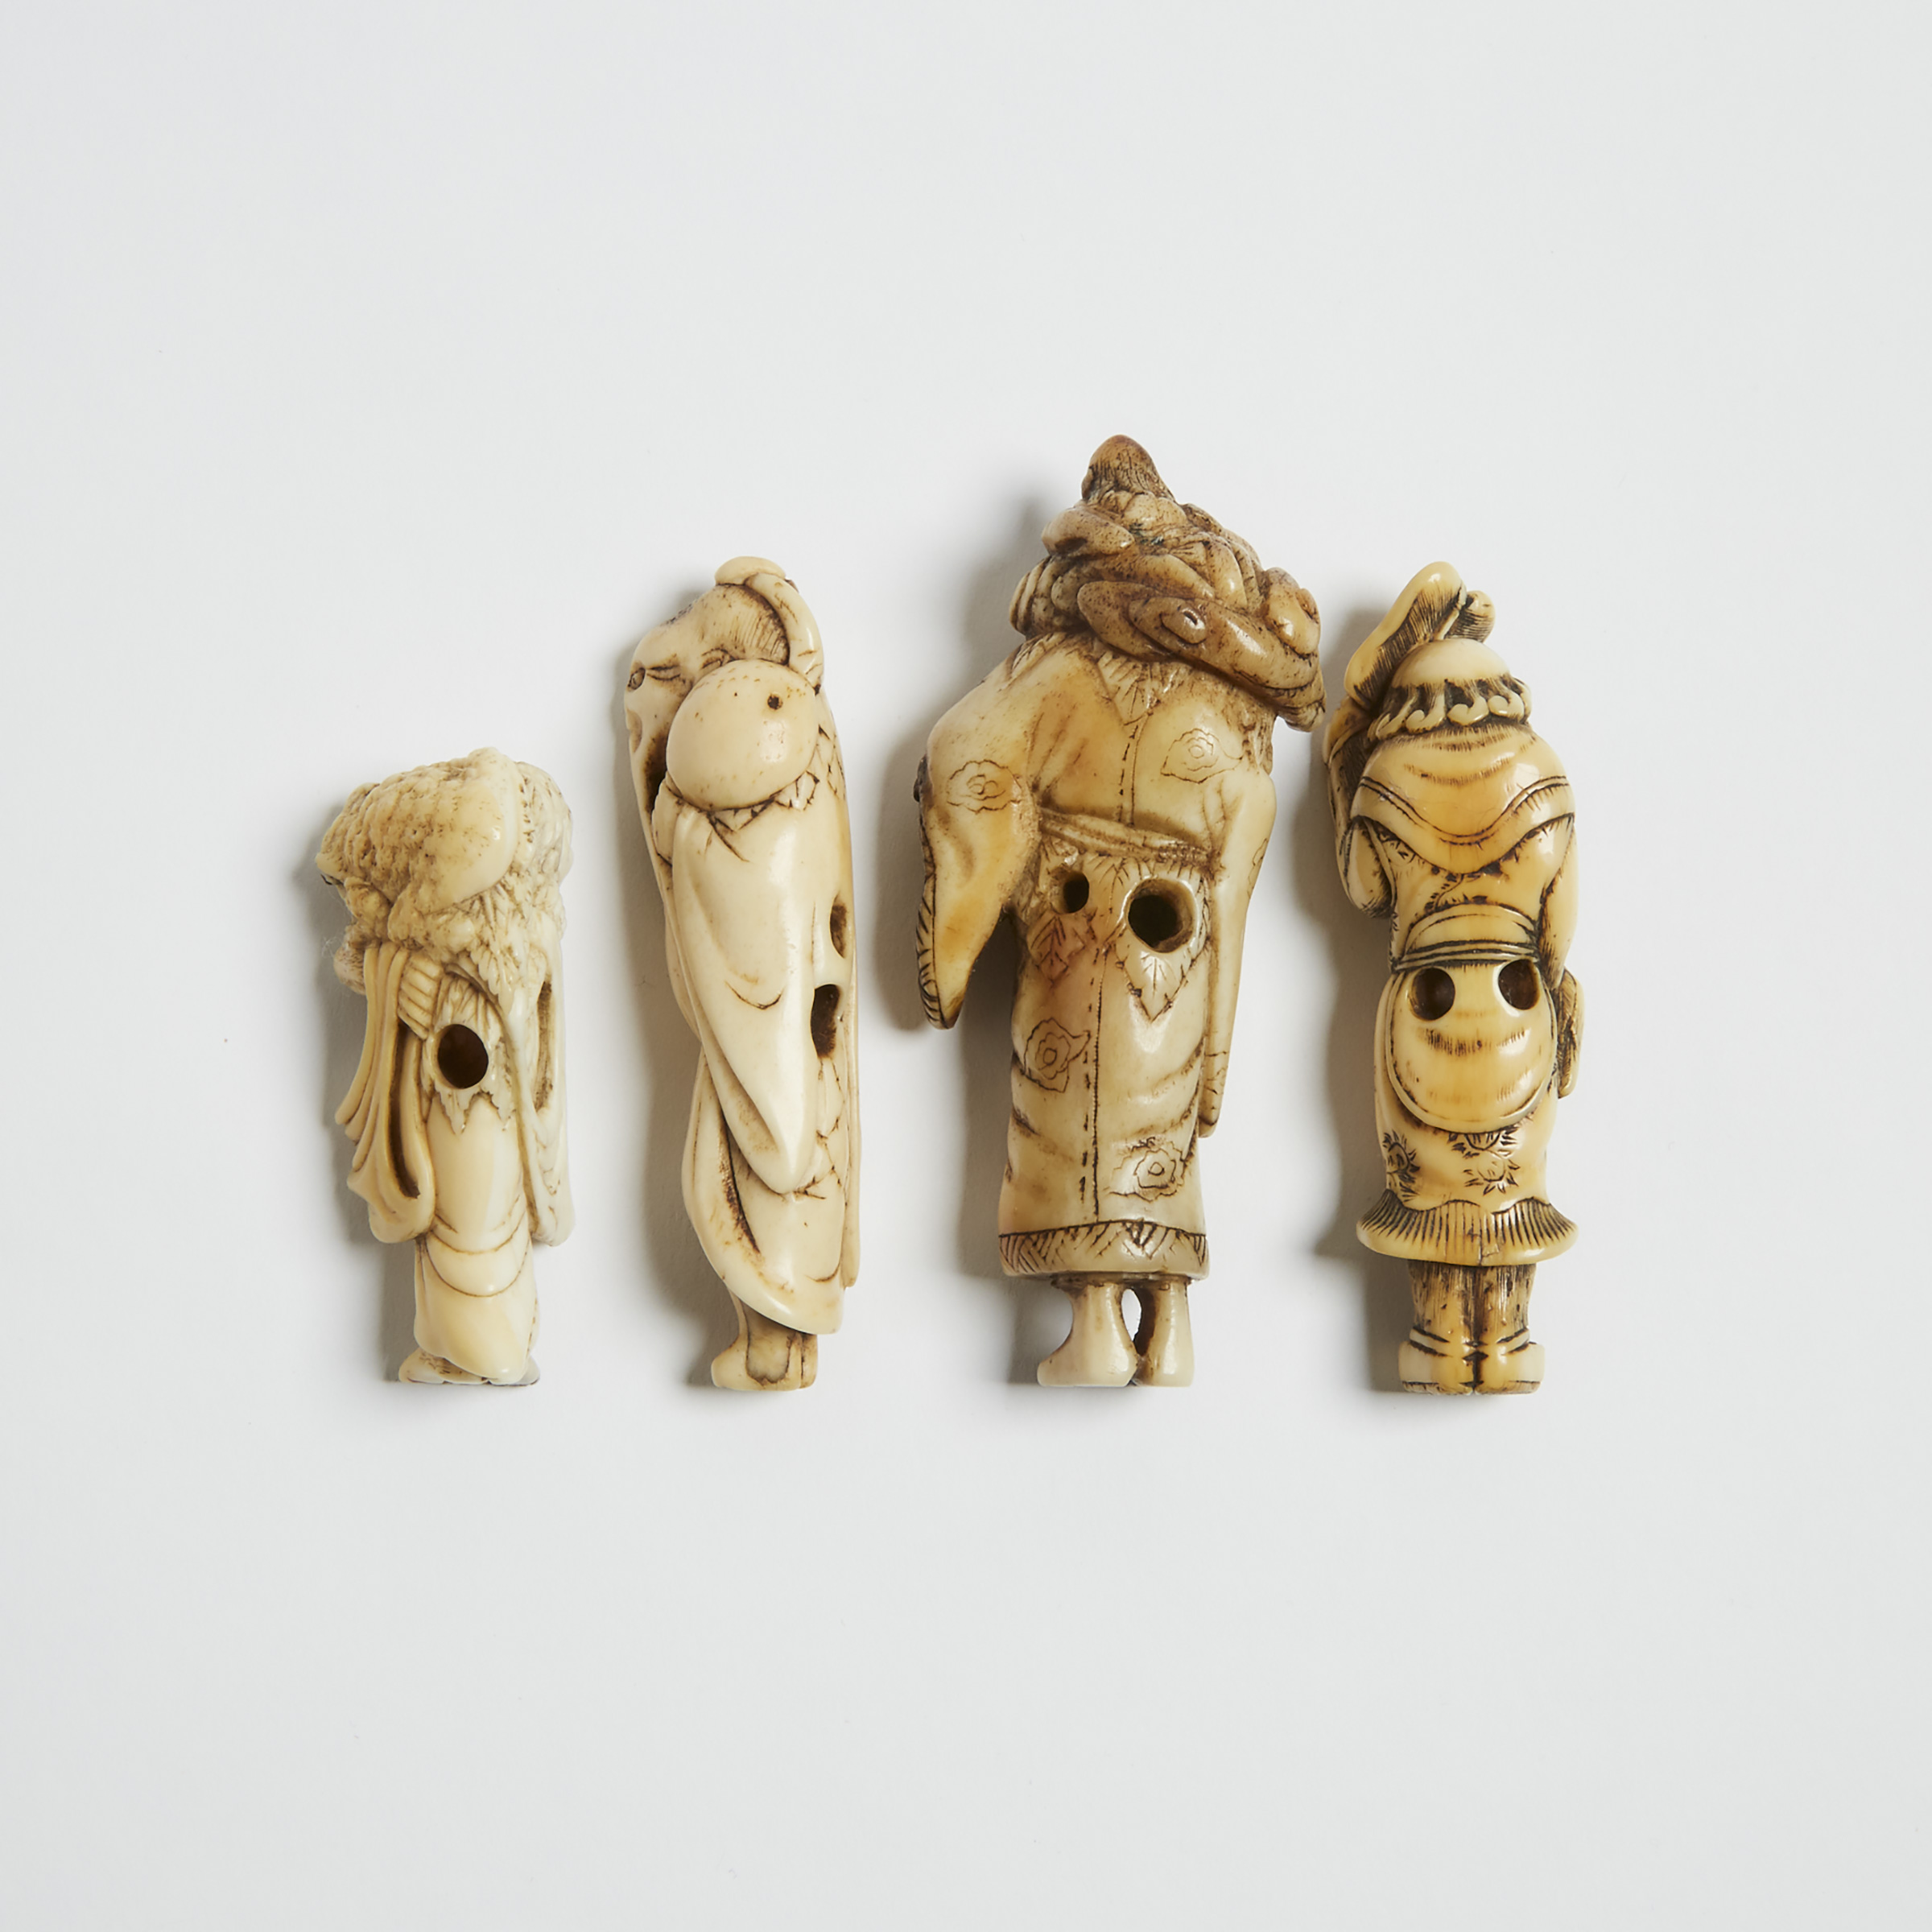 A Group of Four Ivory and Horn Netsuke of Standing Figures, 18th/19th Century